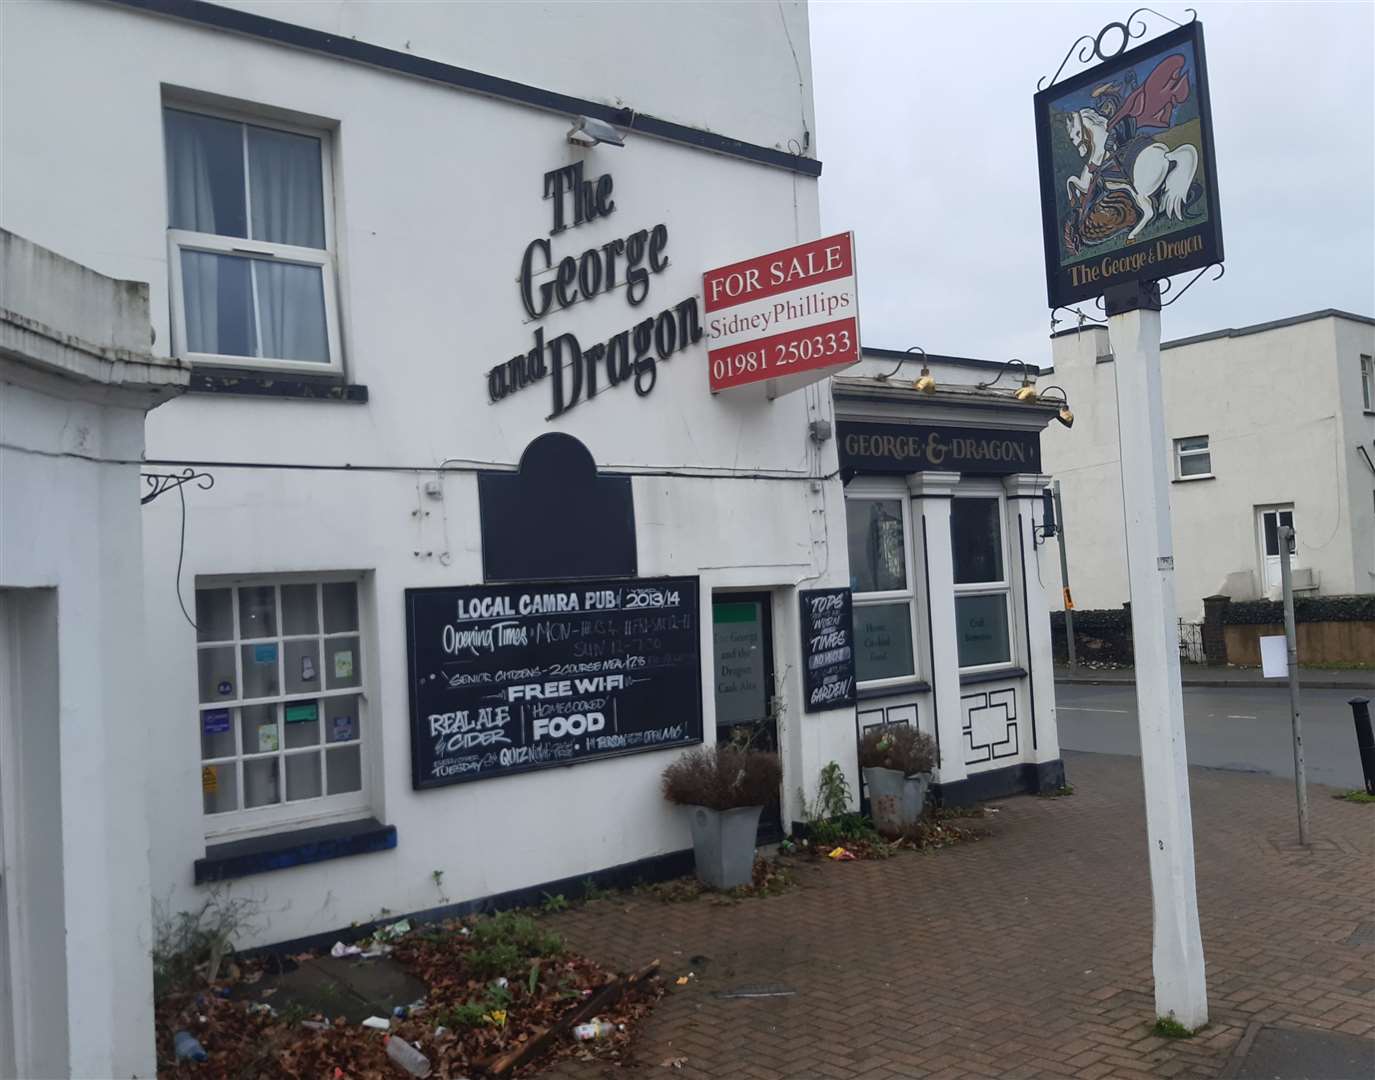 The George and Dragon pub in Swanscombe could be turned into a Domino's Pizza